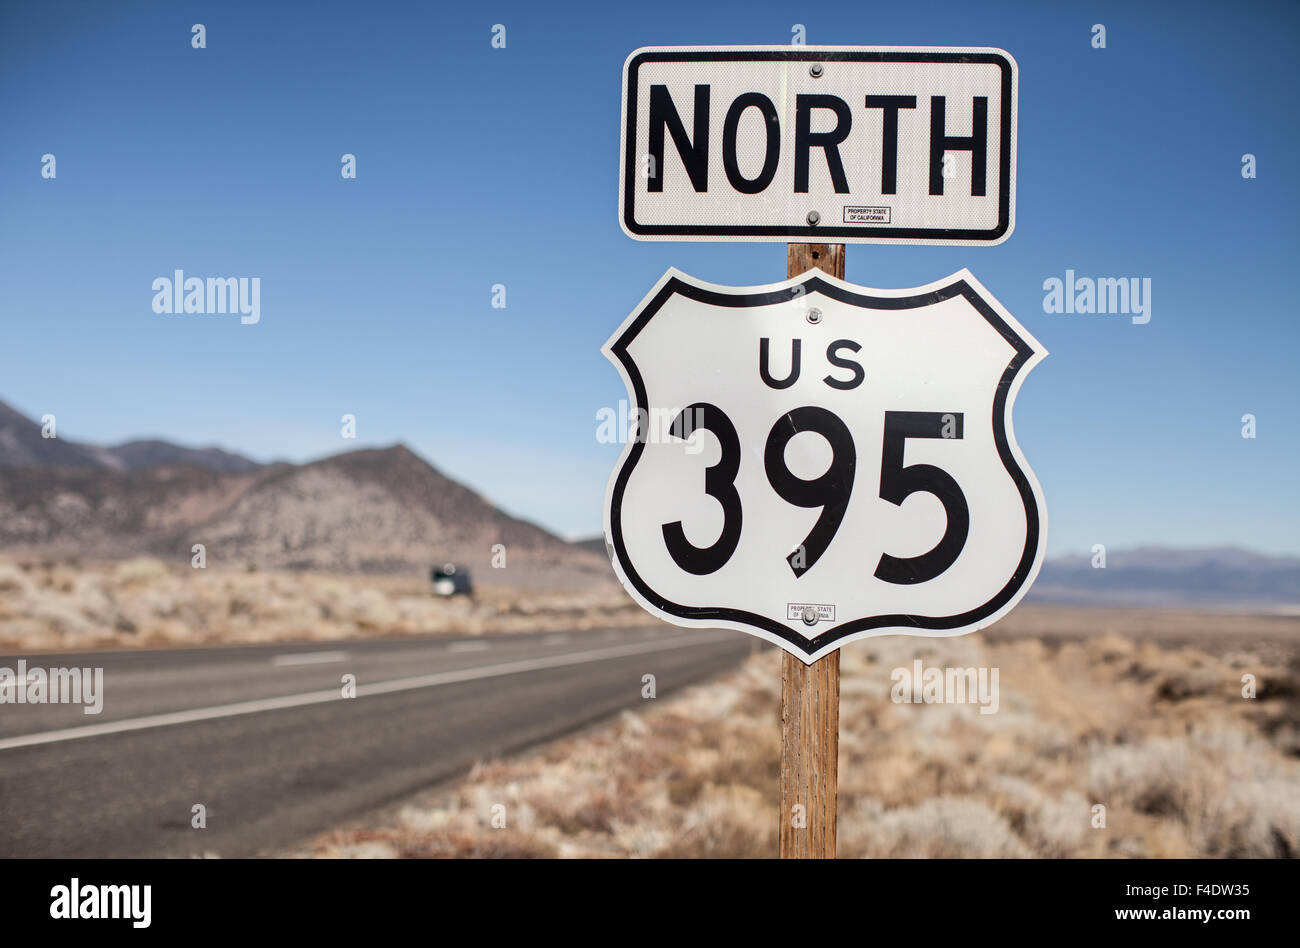 US Route 395 North Sign. Stockfoto